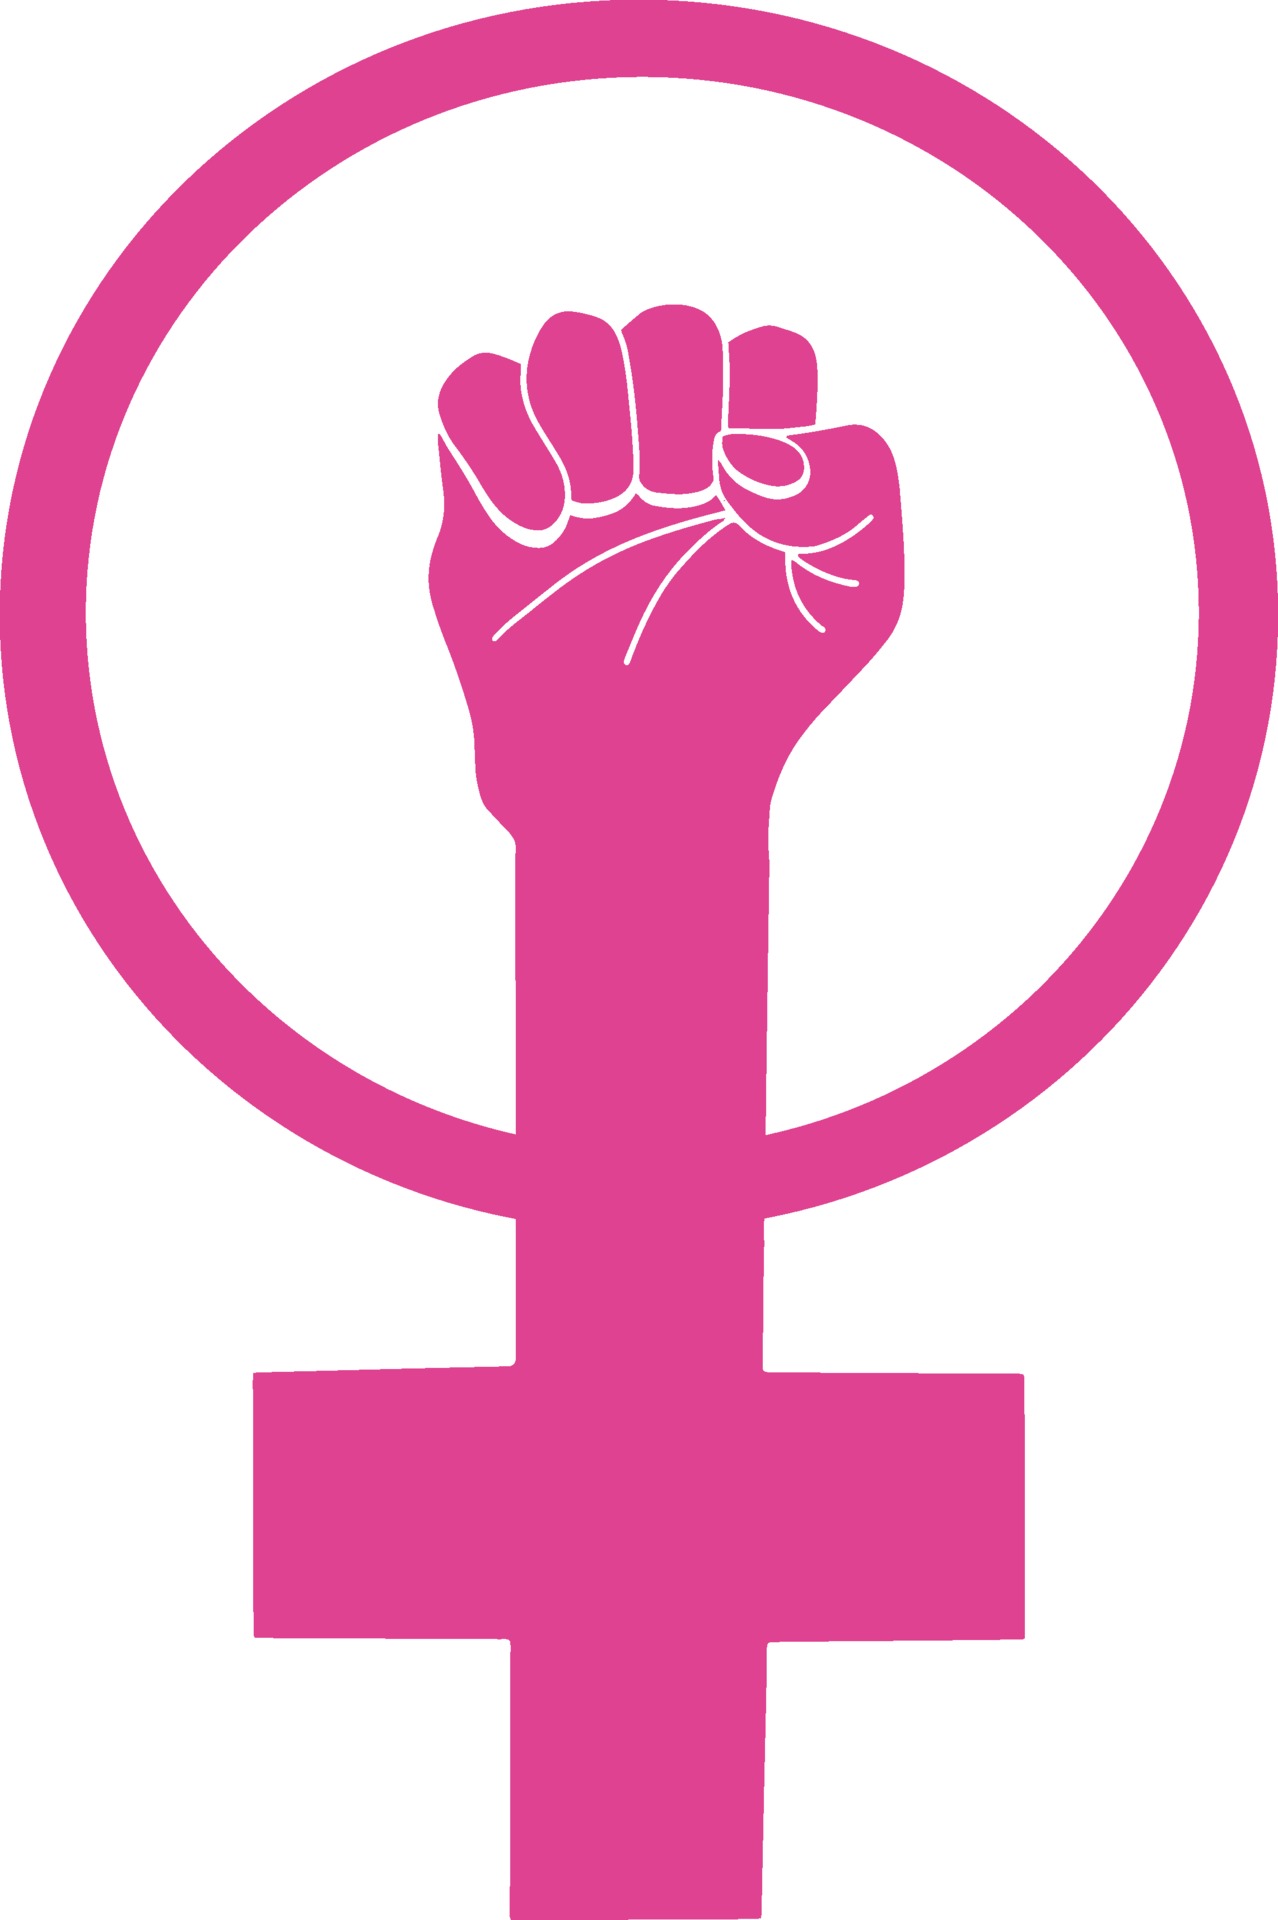 a-symbol-of-feminism-women-s-rights-feminist-icon-free-vector.jpg